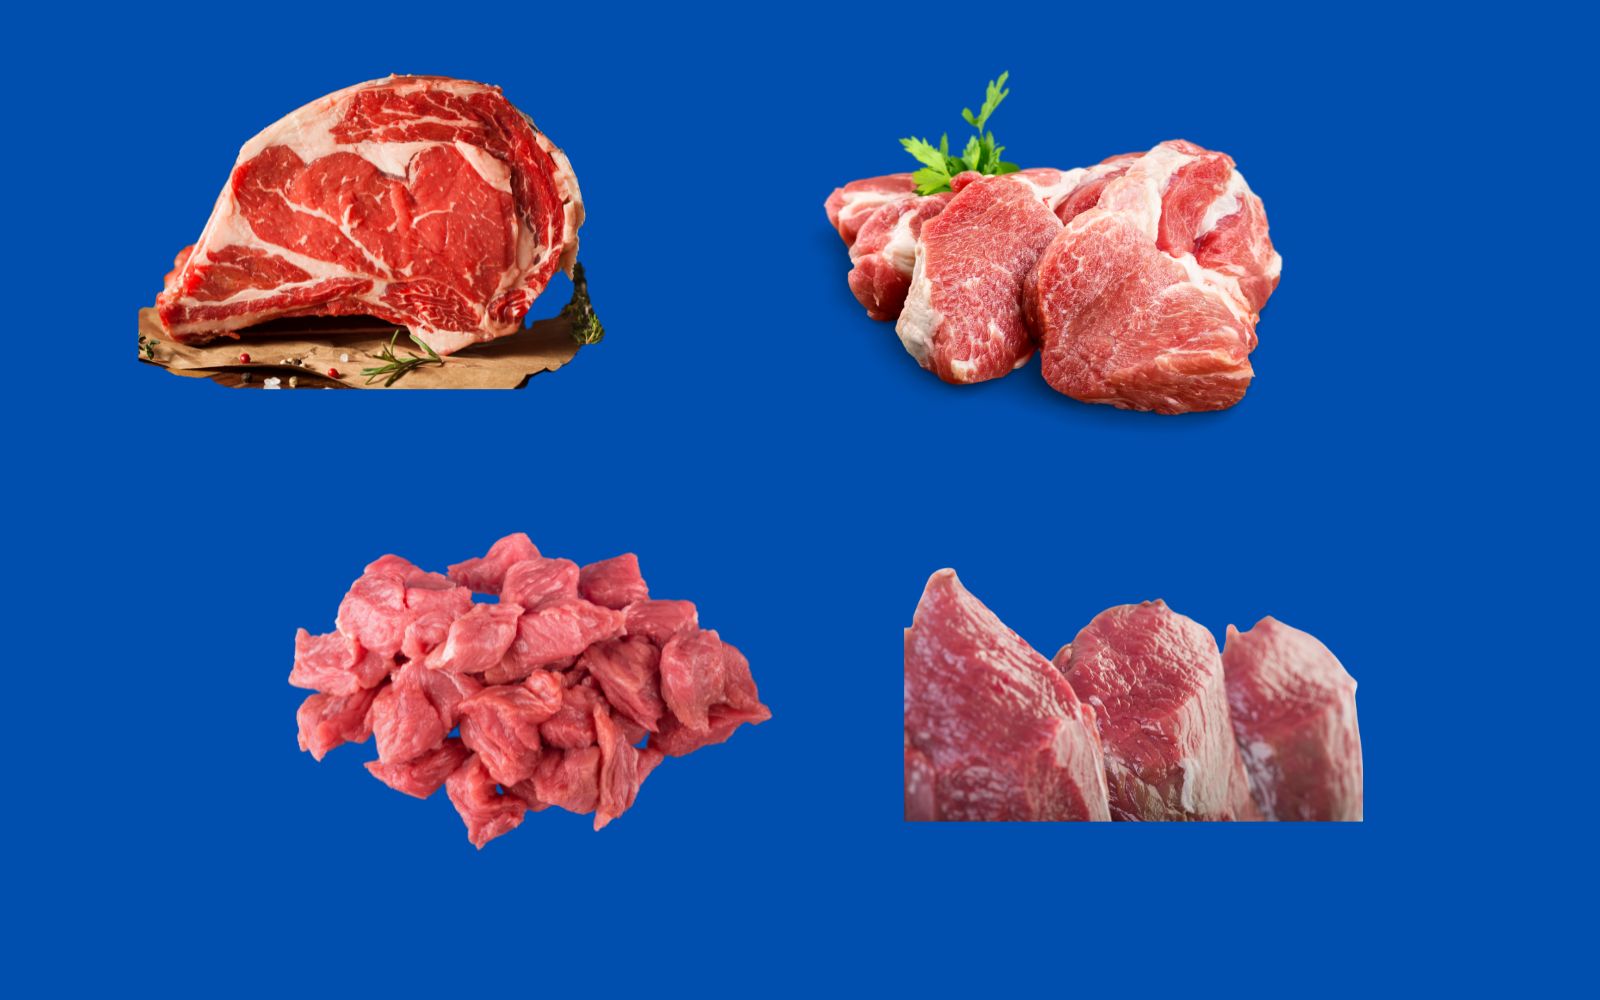 Examples of grass-fed meats